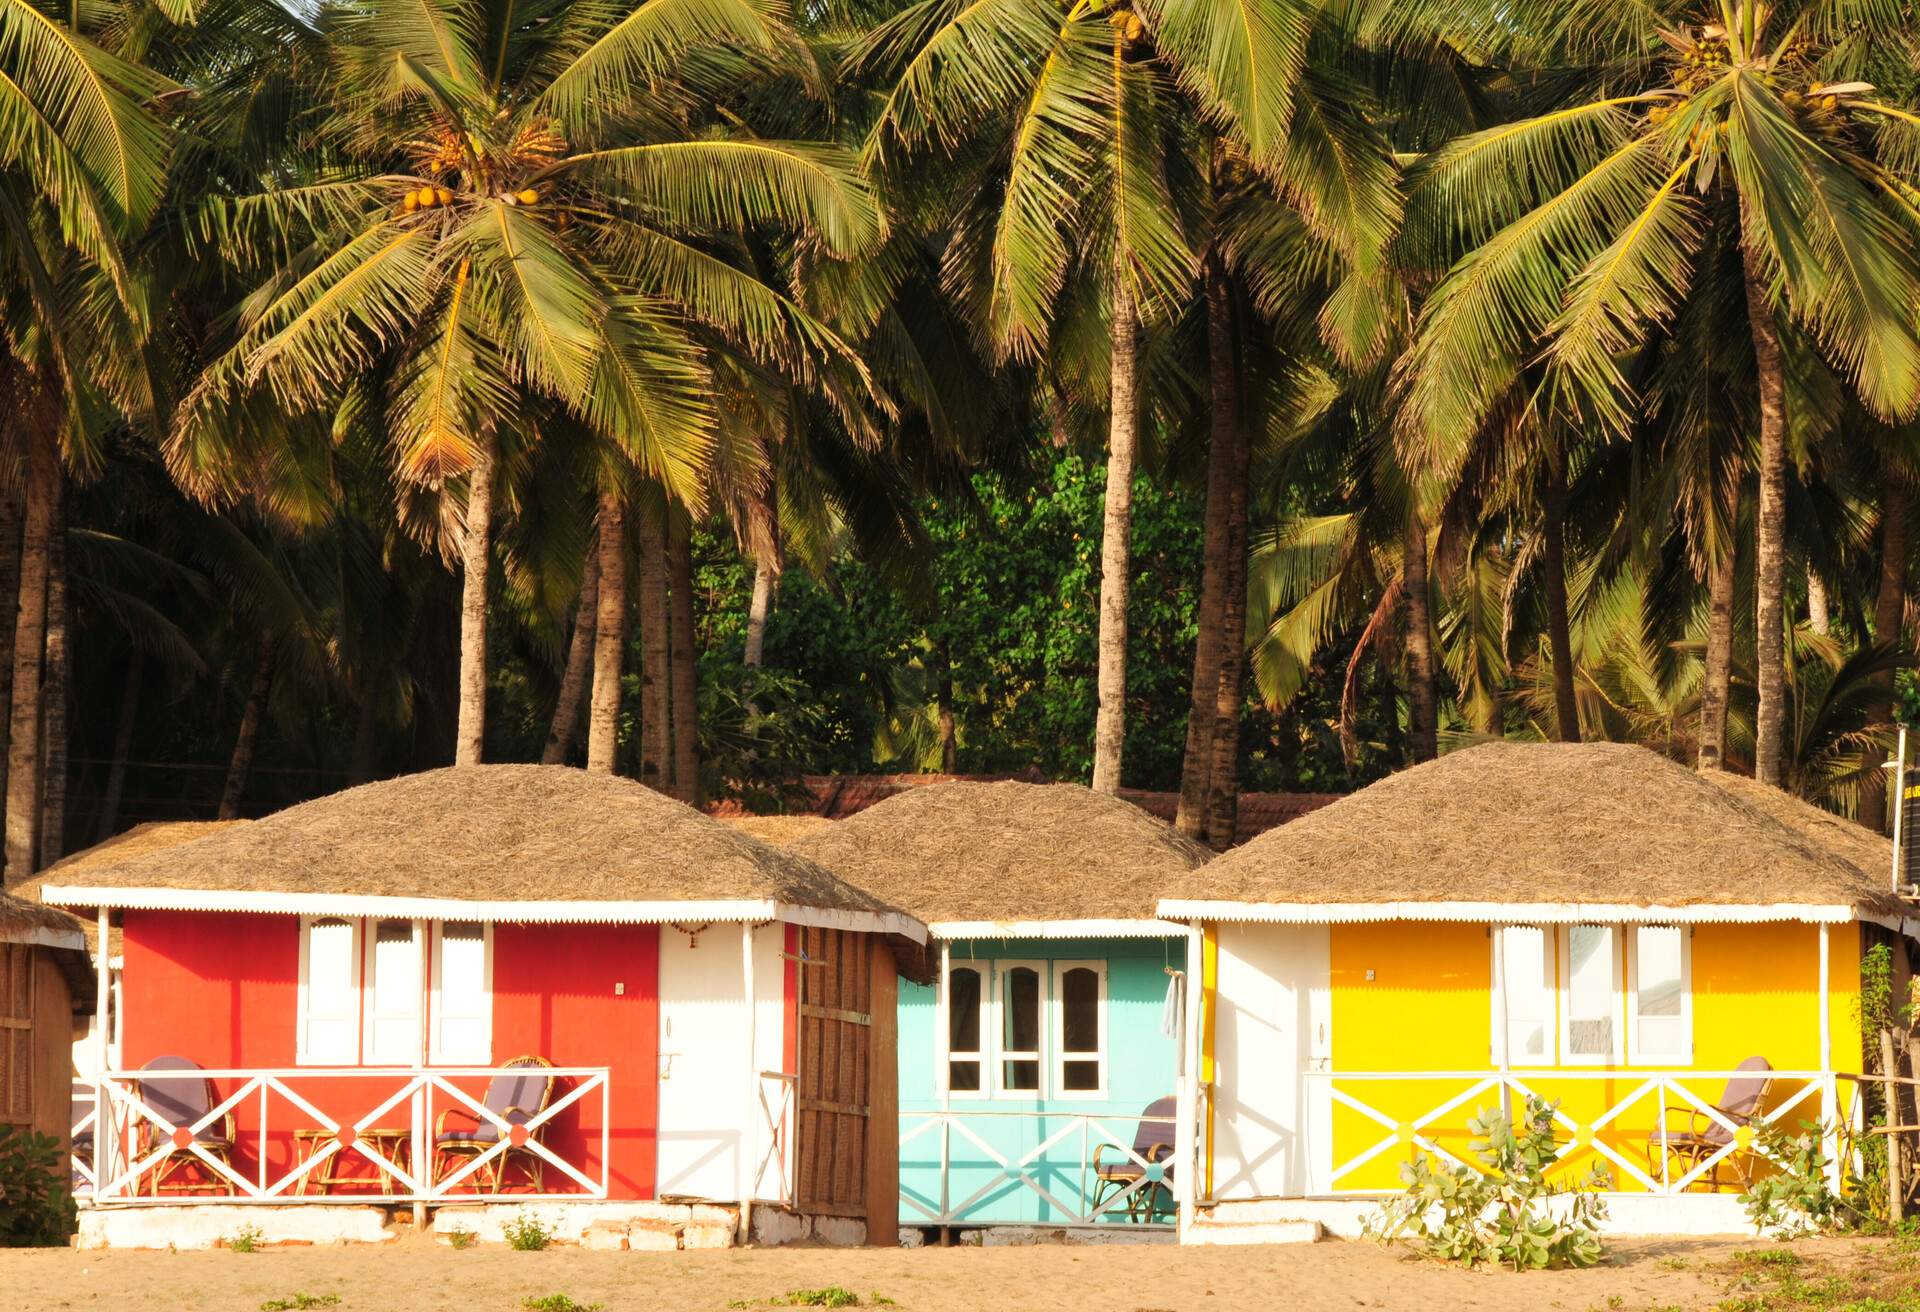 Colourful beach huts cluster under the lush palm trees.